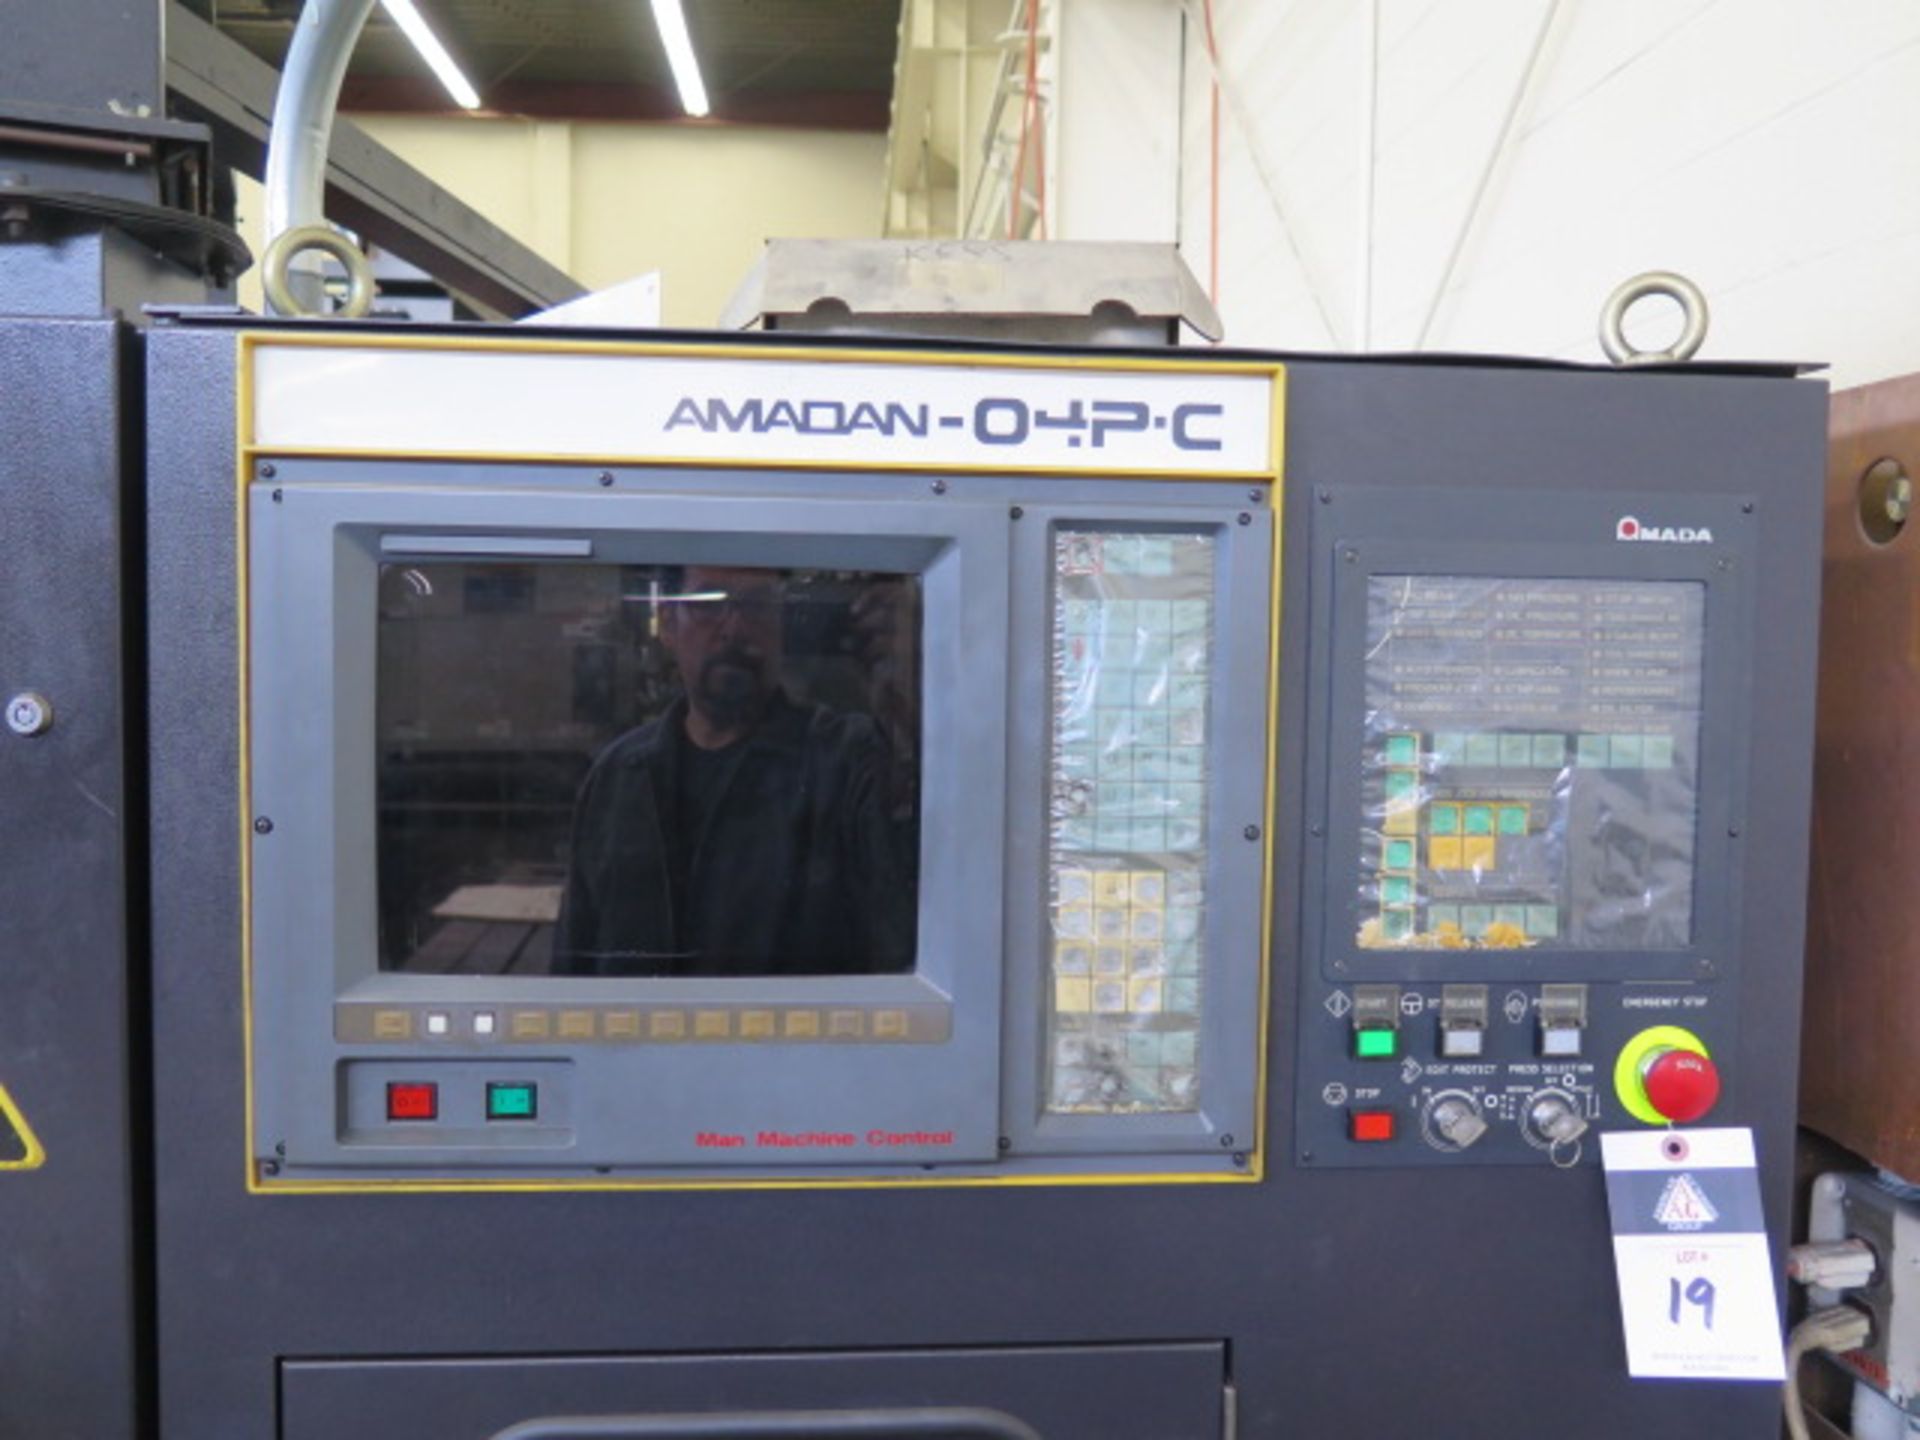 Amada VIPROS 345 30-Ton CNC Turret Punch Cell s/n 34510153 w/ 04P-C Controls, 58-Station, SOLD AS IS - Image 14 of 28